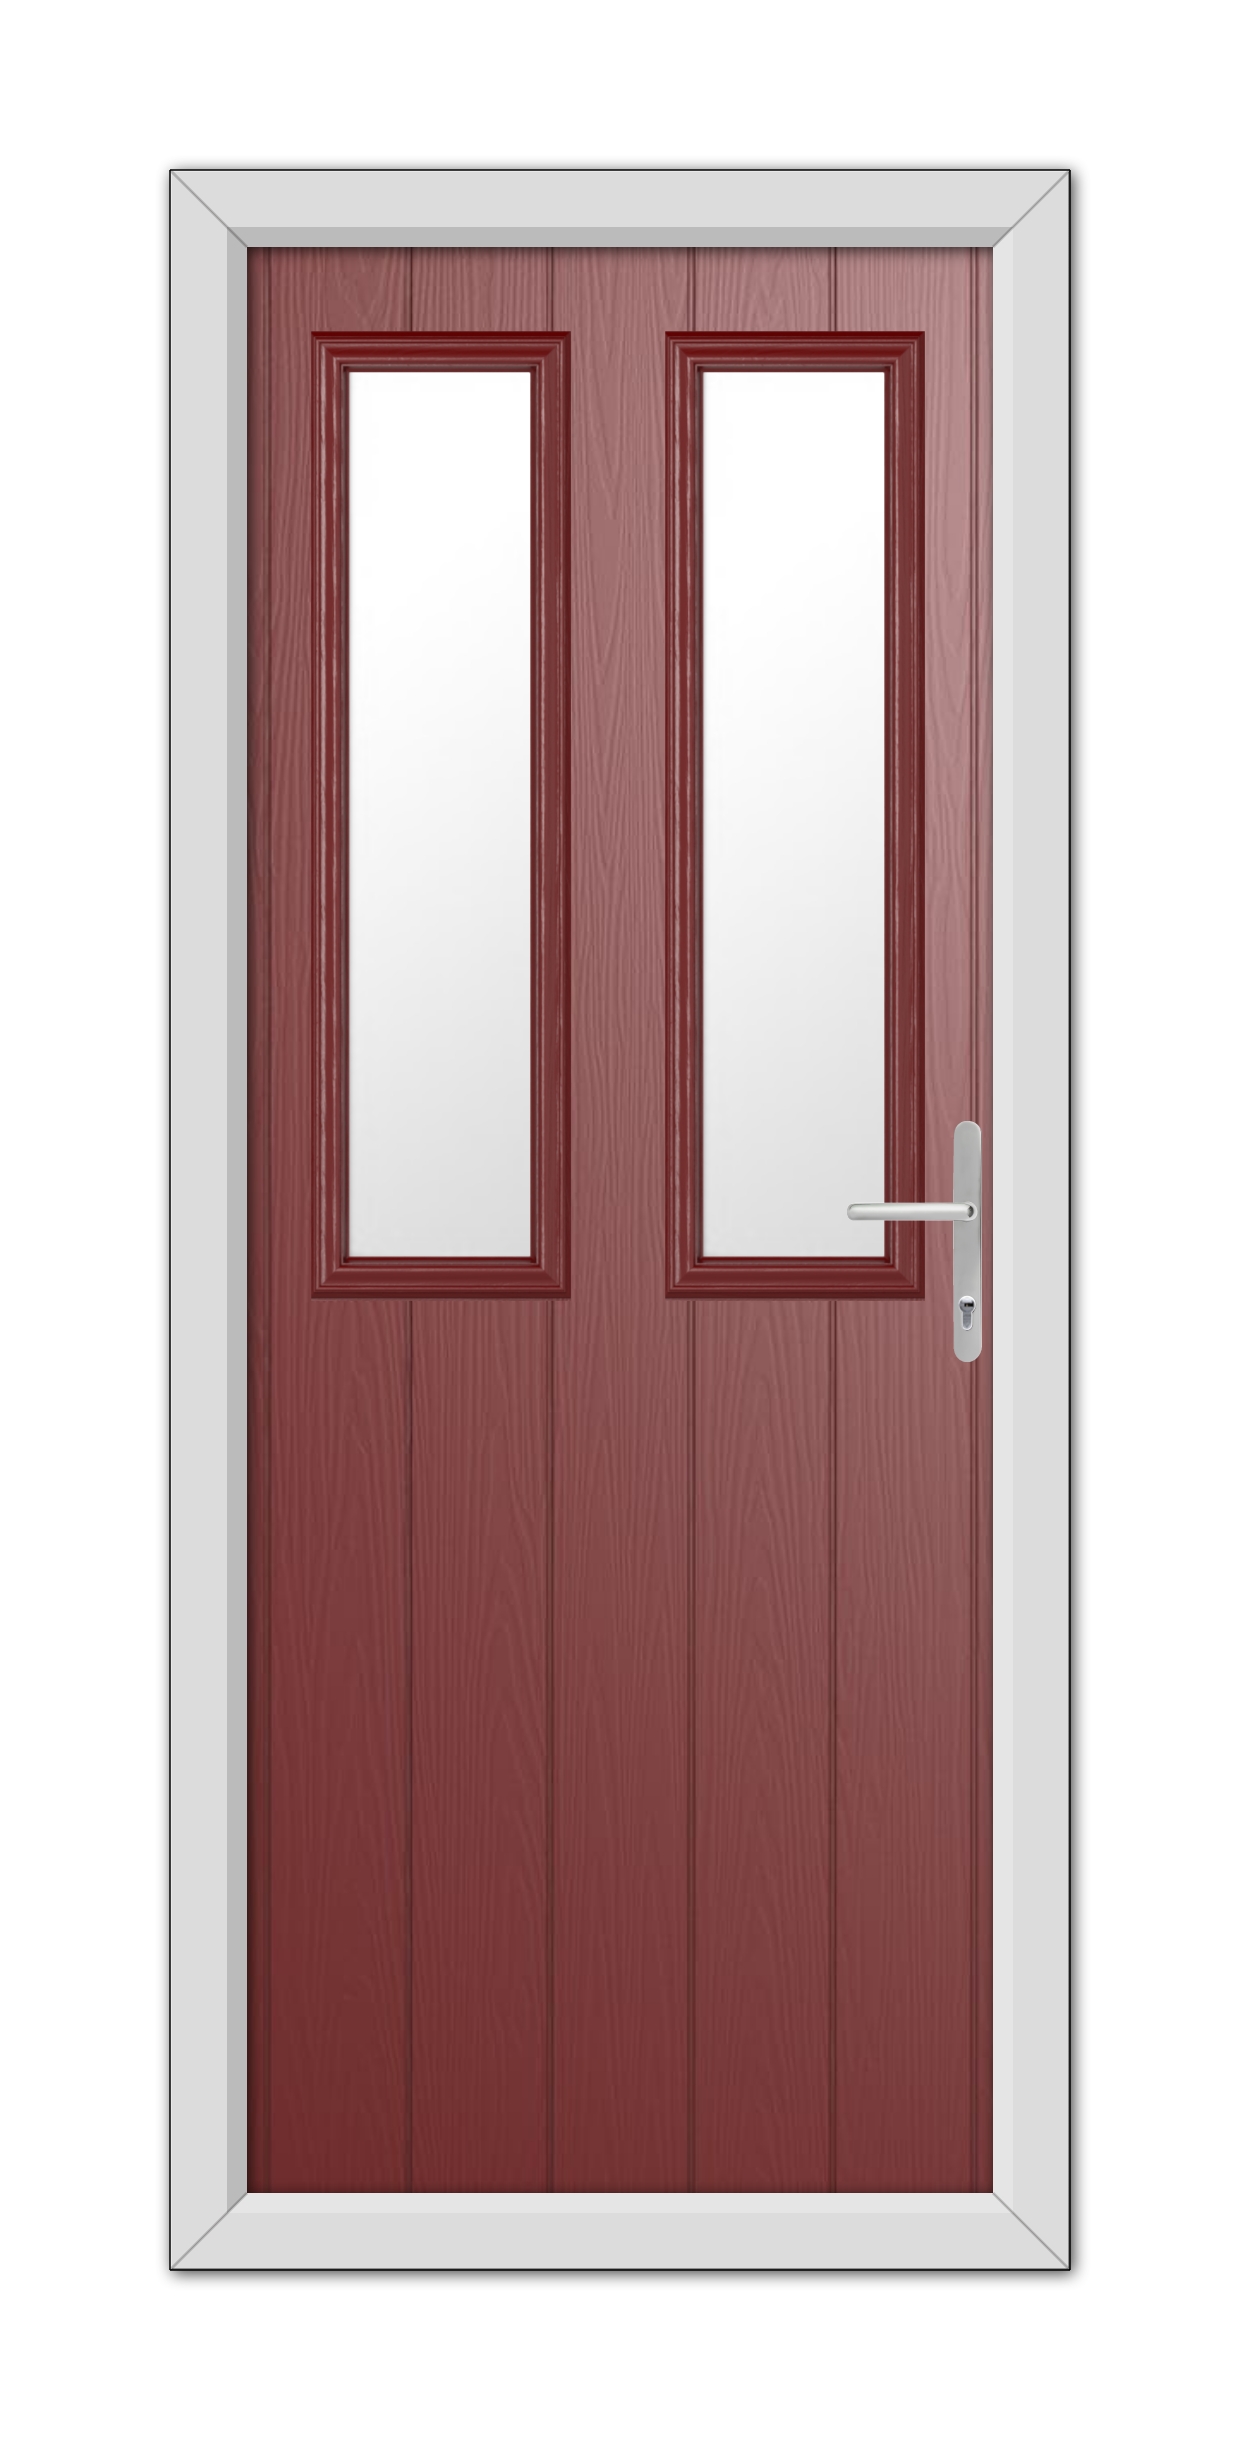 Red Wellington Composite Door 48mm Timber Core with glass windows and a white handle, set in a gray frame.